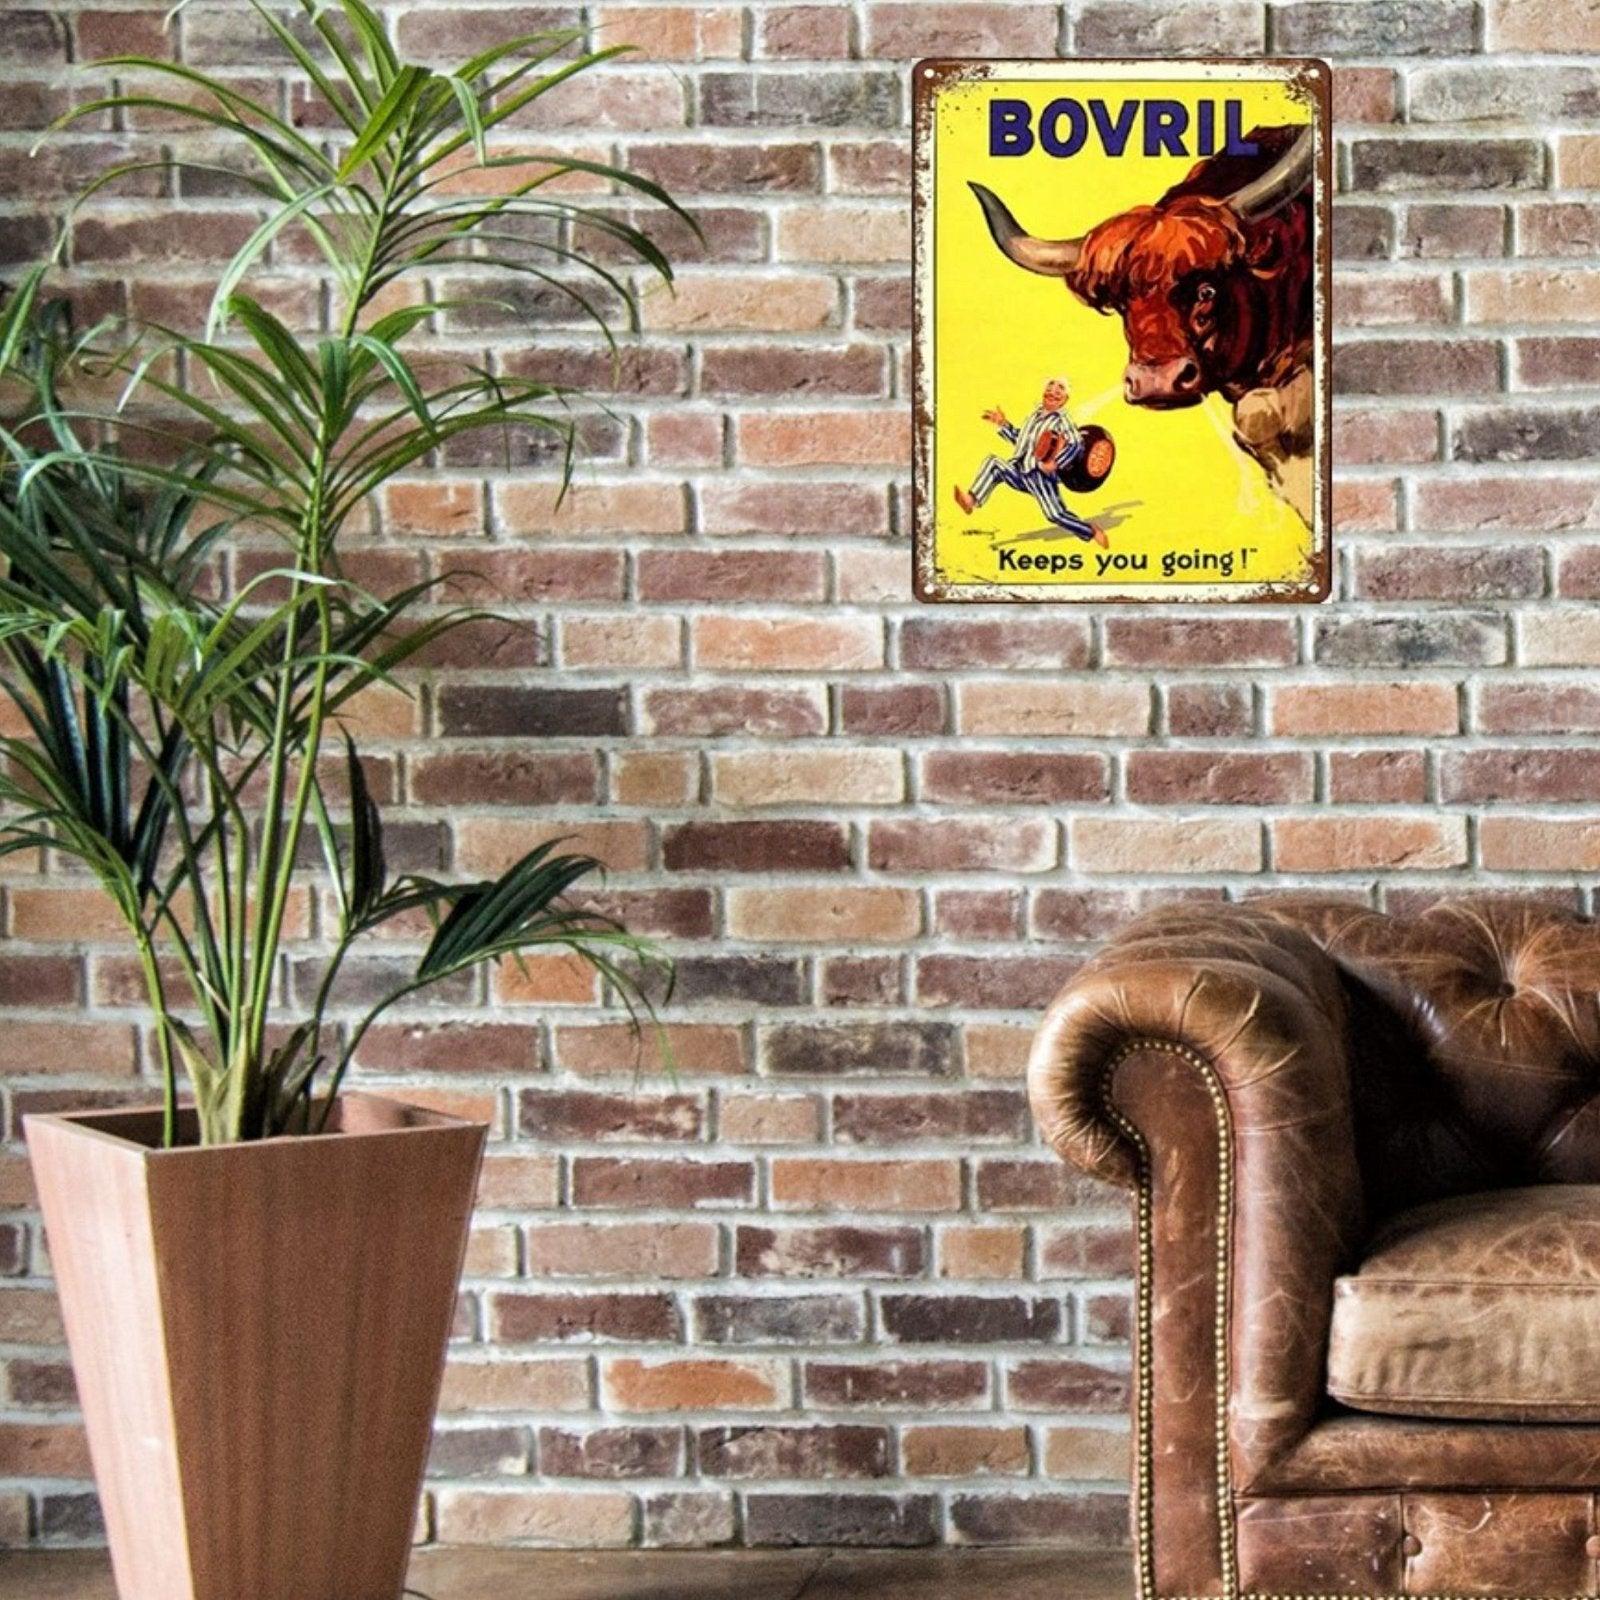 View Large Metal Sign 60 x 495cm Bovril Keeps you going information